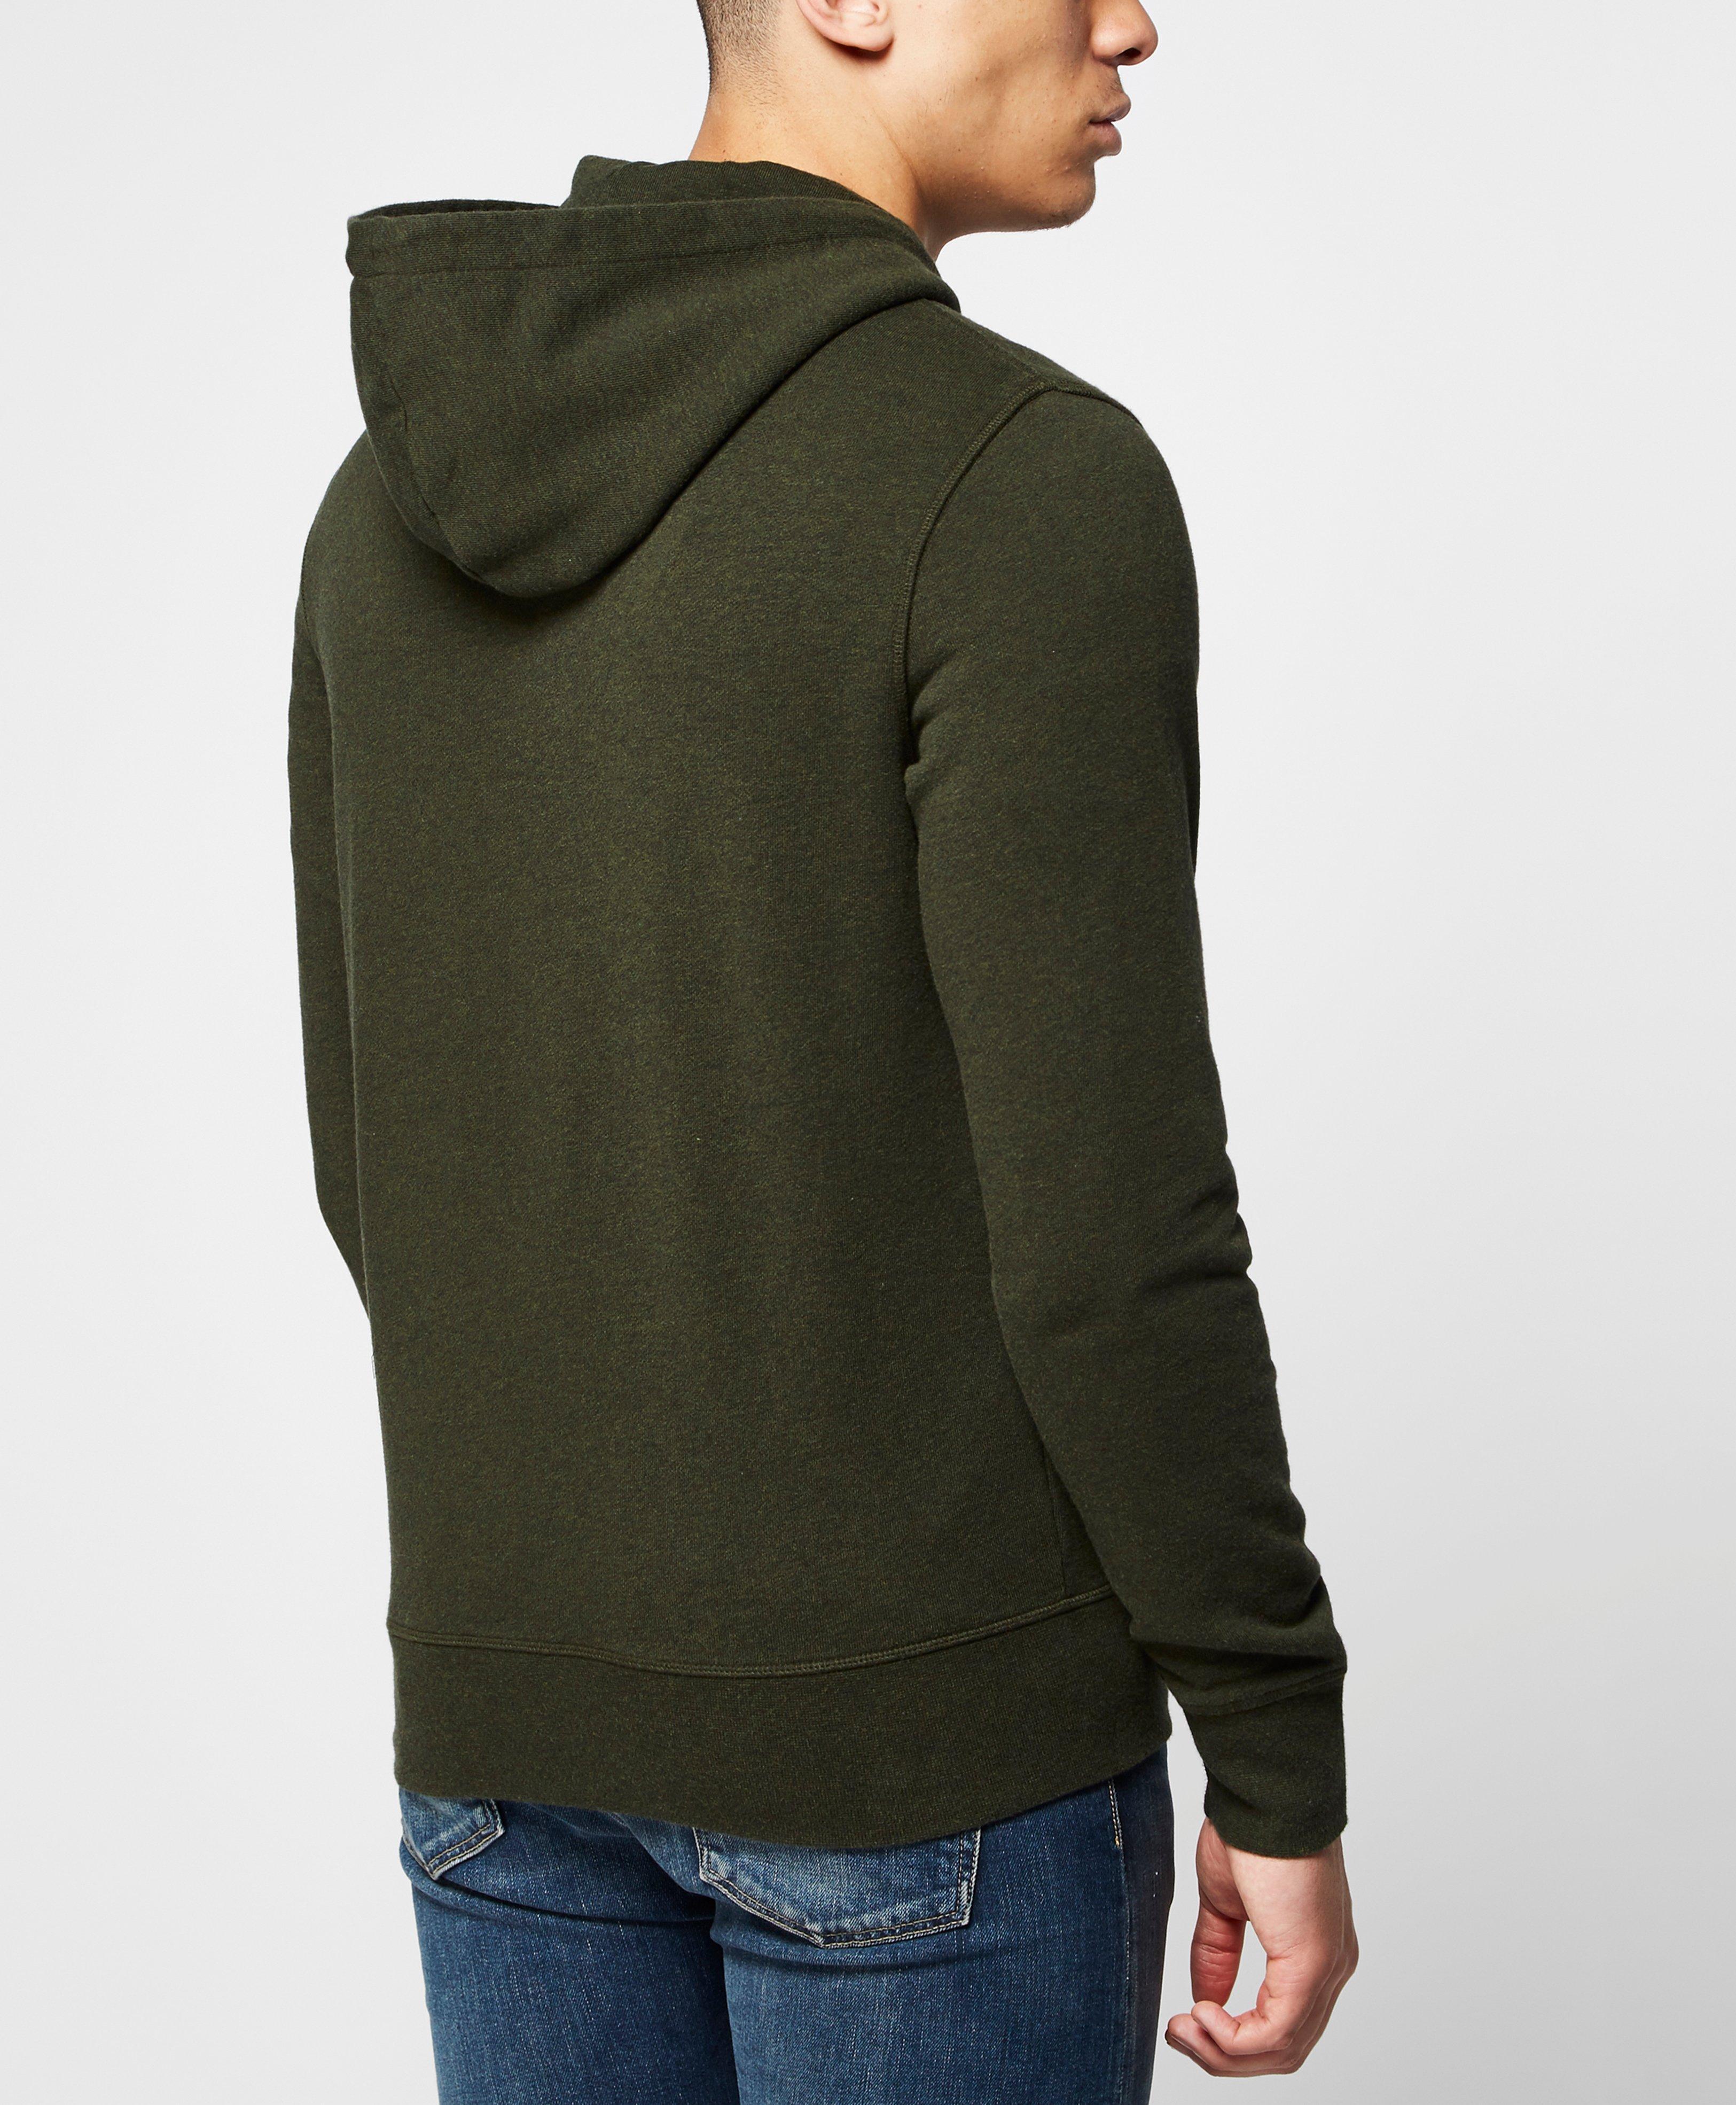 Fred Perry Cotton Loop Back Full Zip Hoody in Green for Men - Lyst